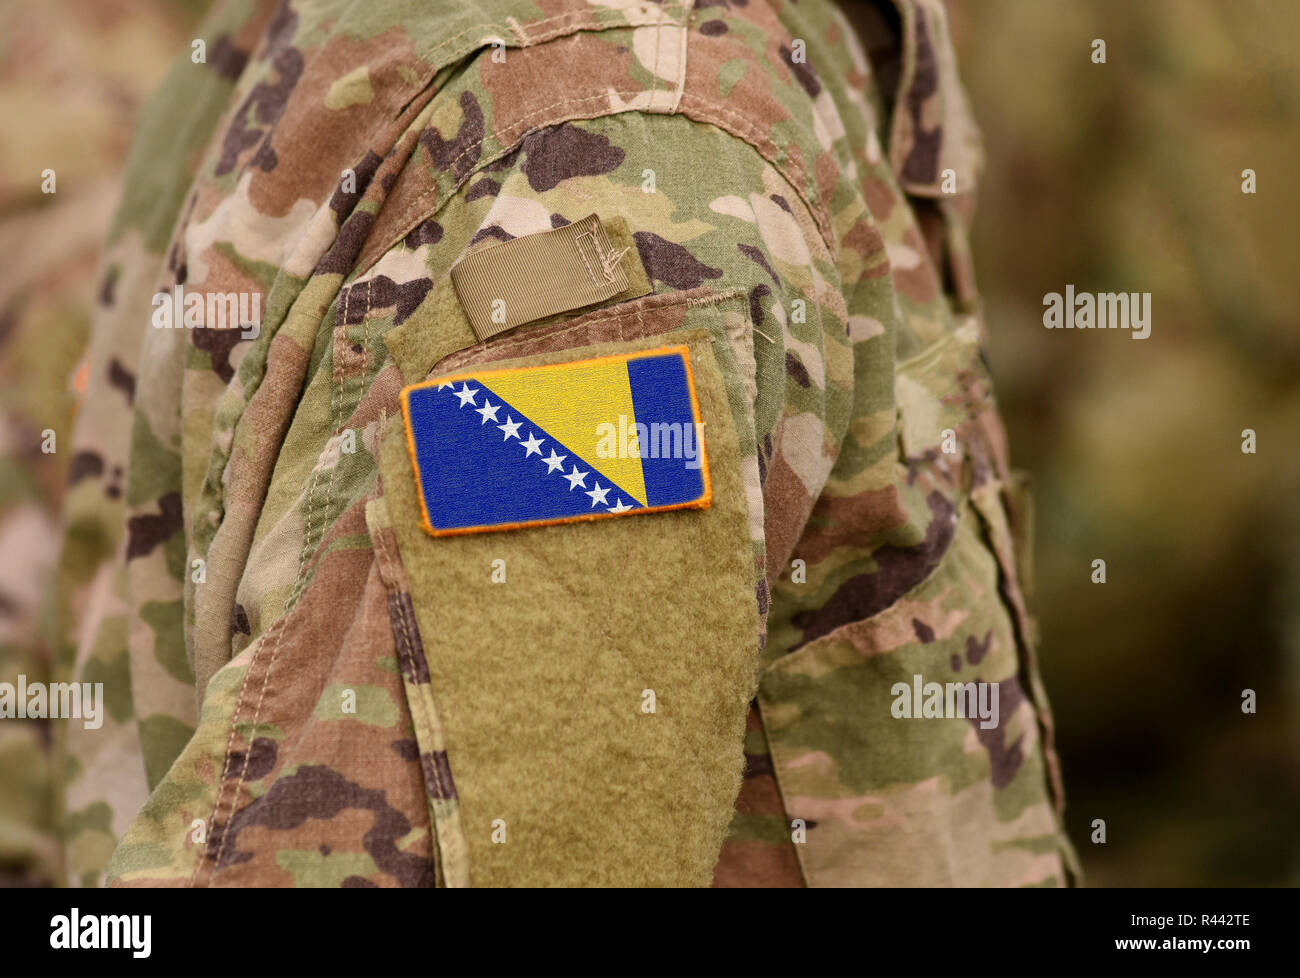 Bosnia and Herzegovina flag on soldiers arm (collage). Stock Photo